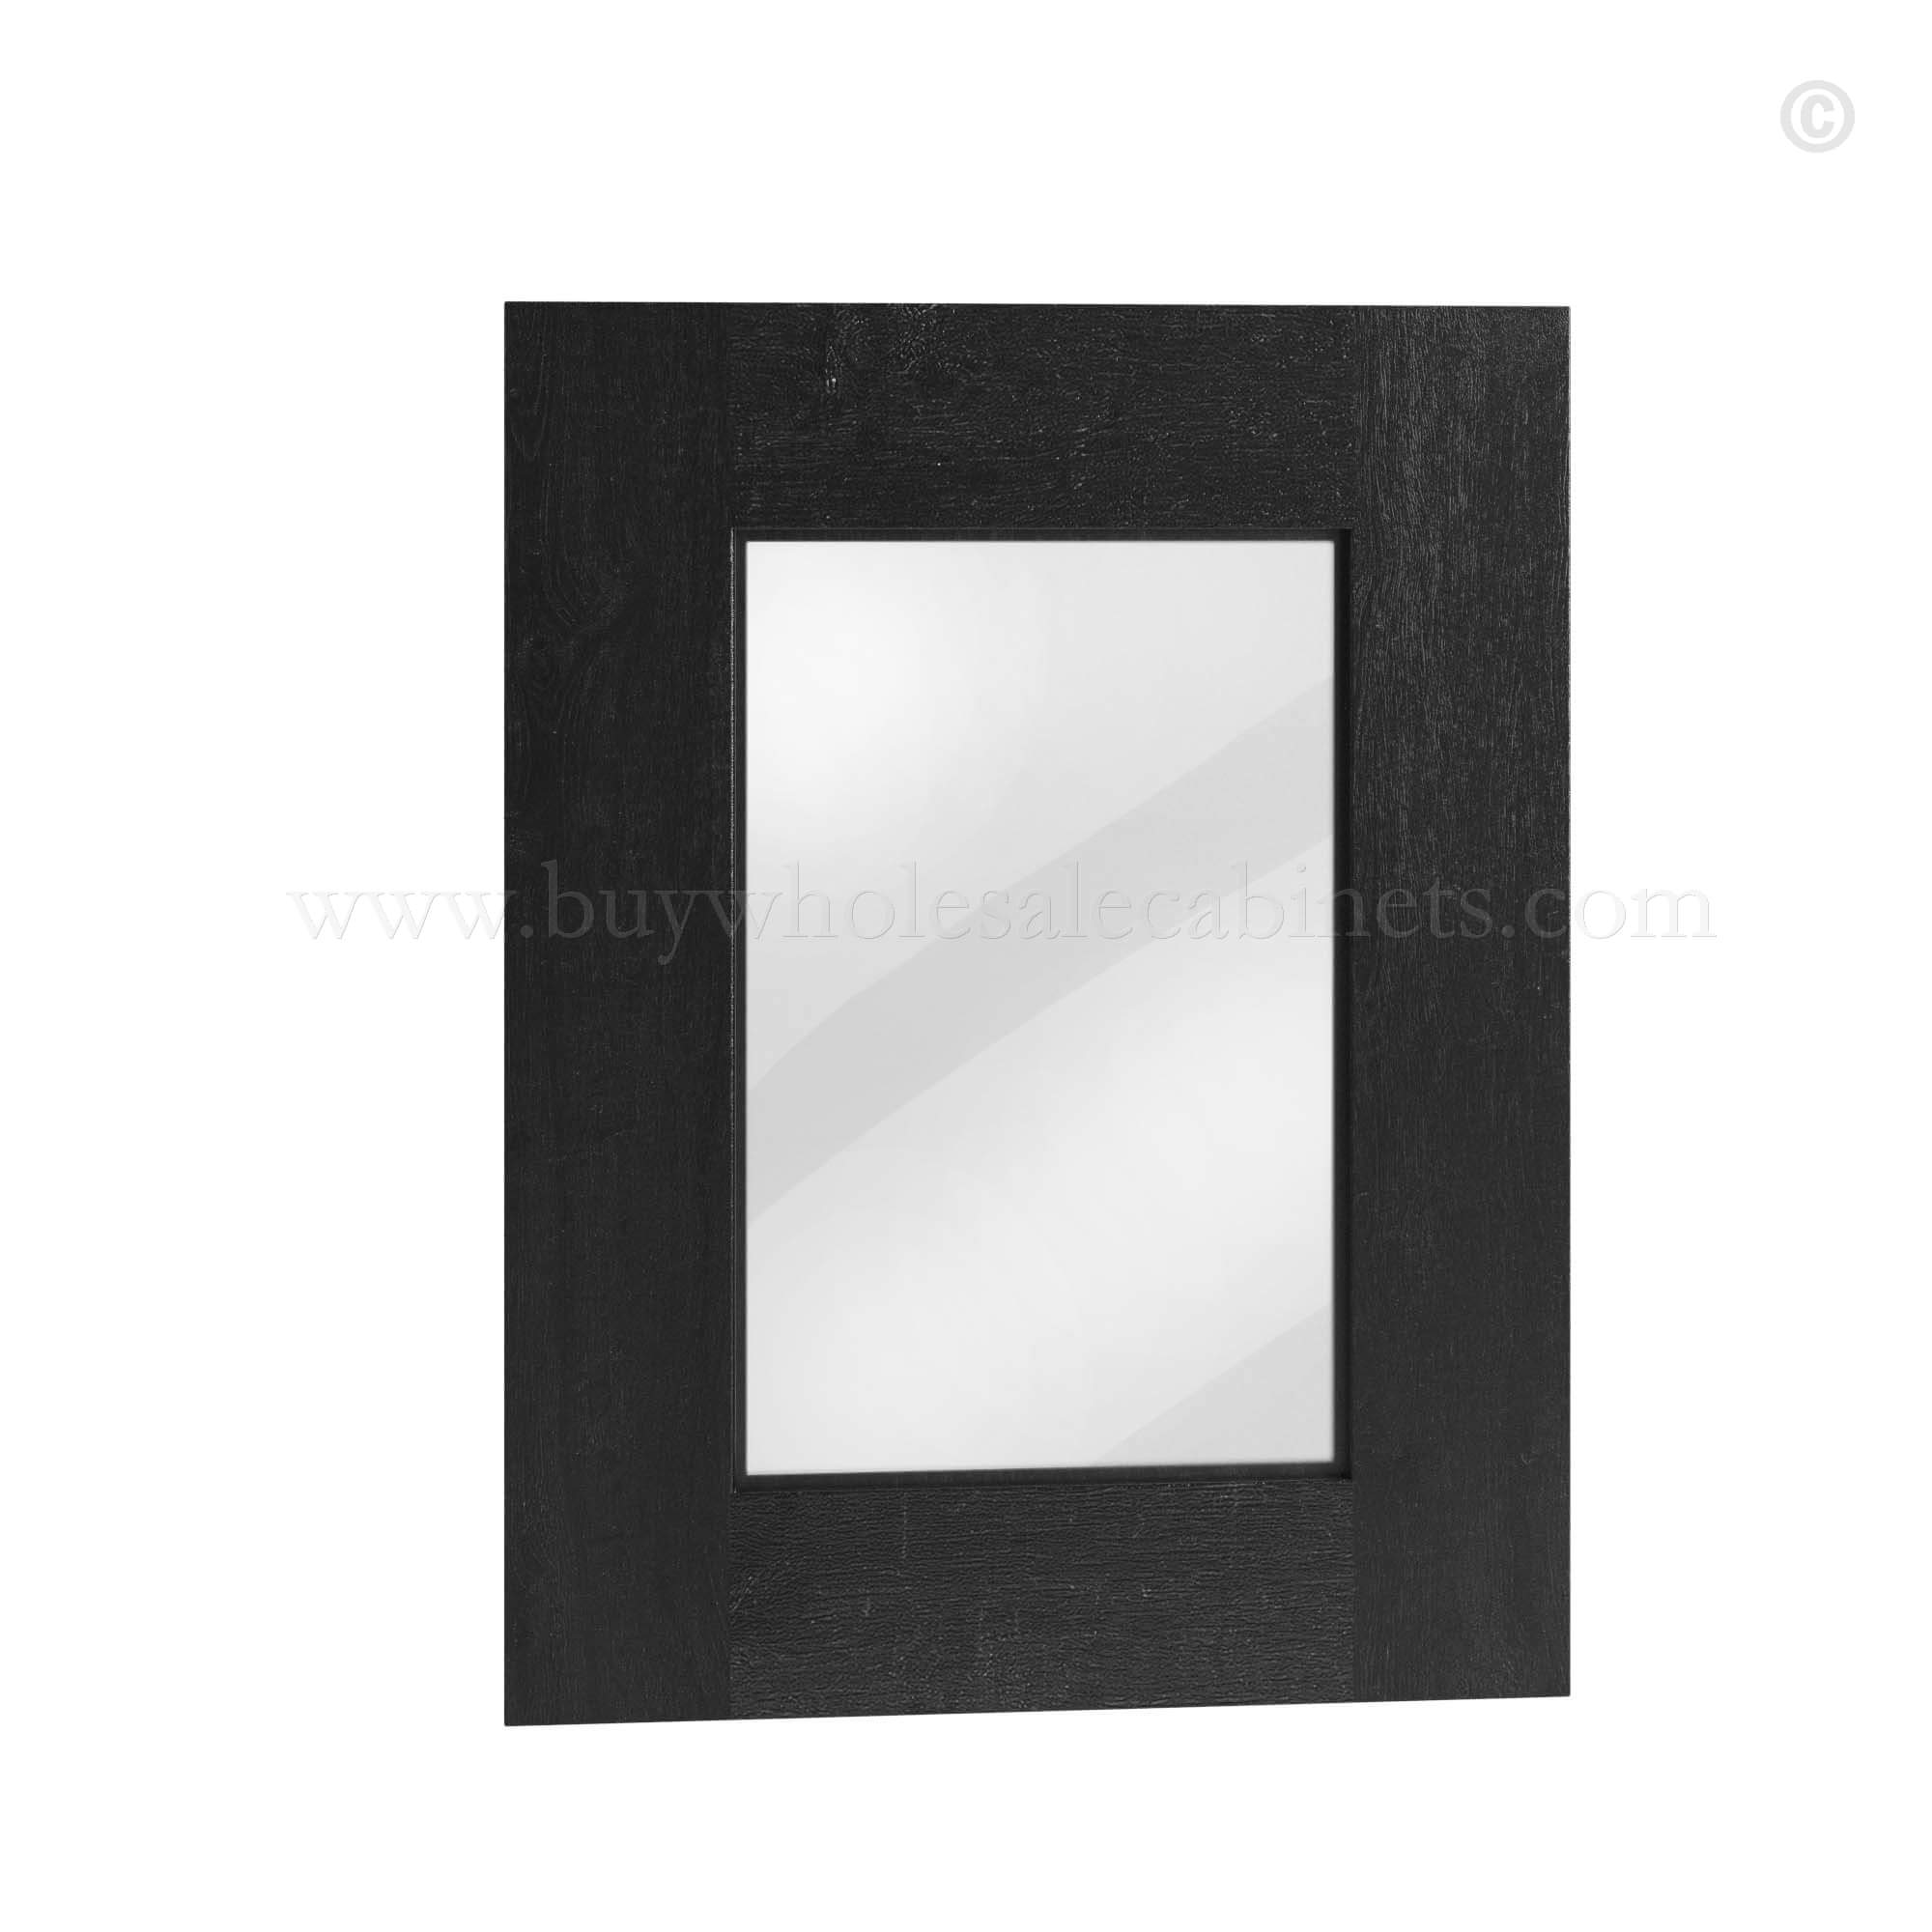 Charcoal Black Shaker Mirrors, rta cabinets, wholesale cabinets